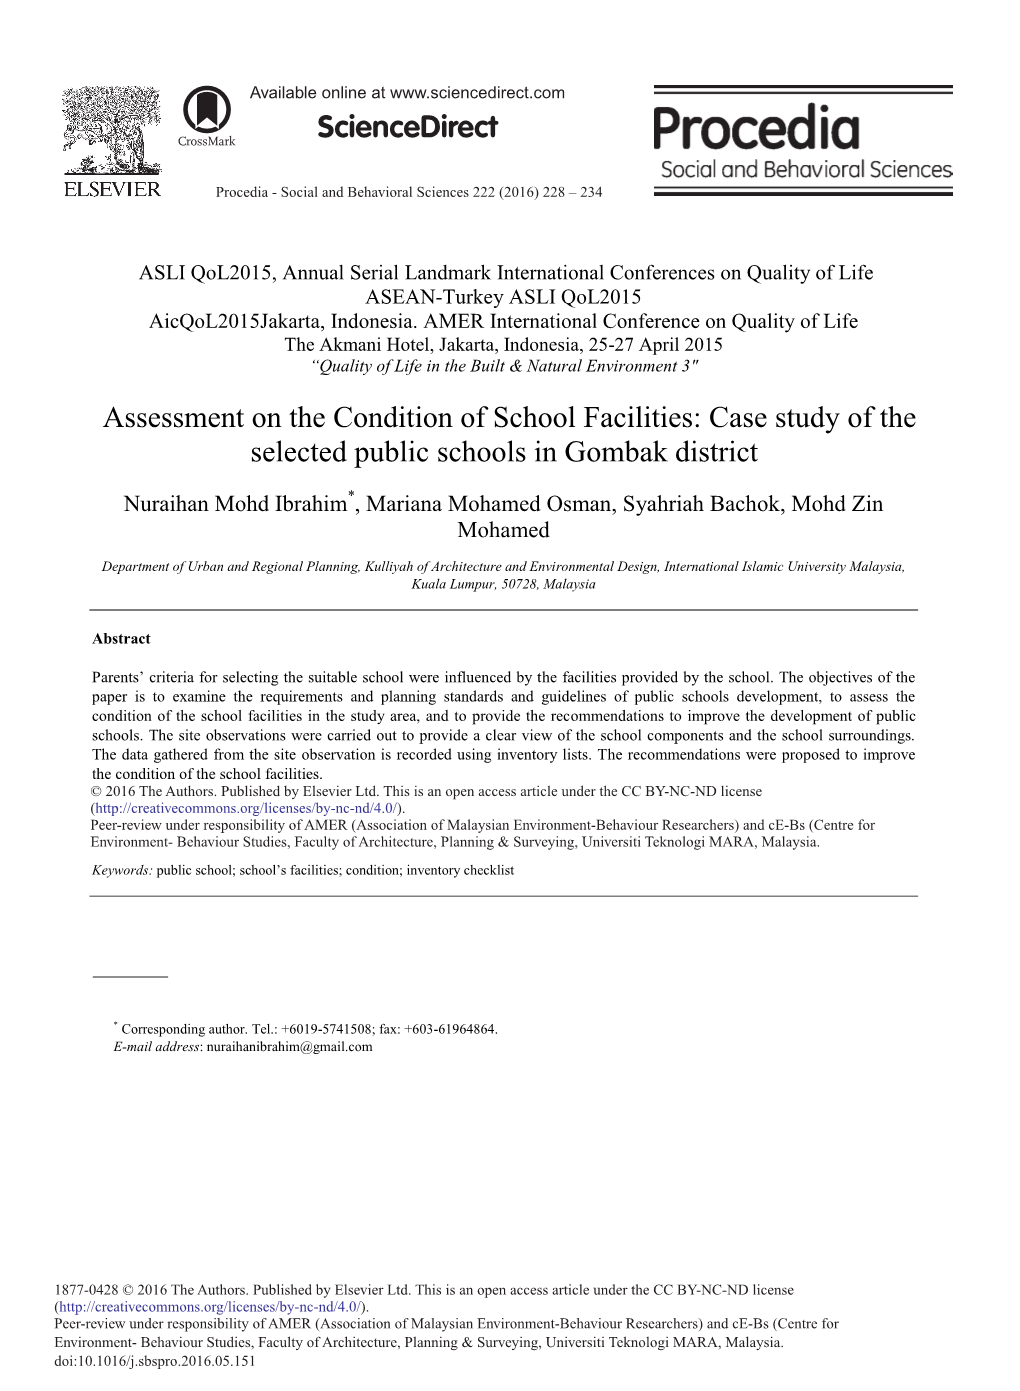 Assessment on the Condition of School Facilities: Case Study of the Selected Public Schools in Gombak District